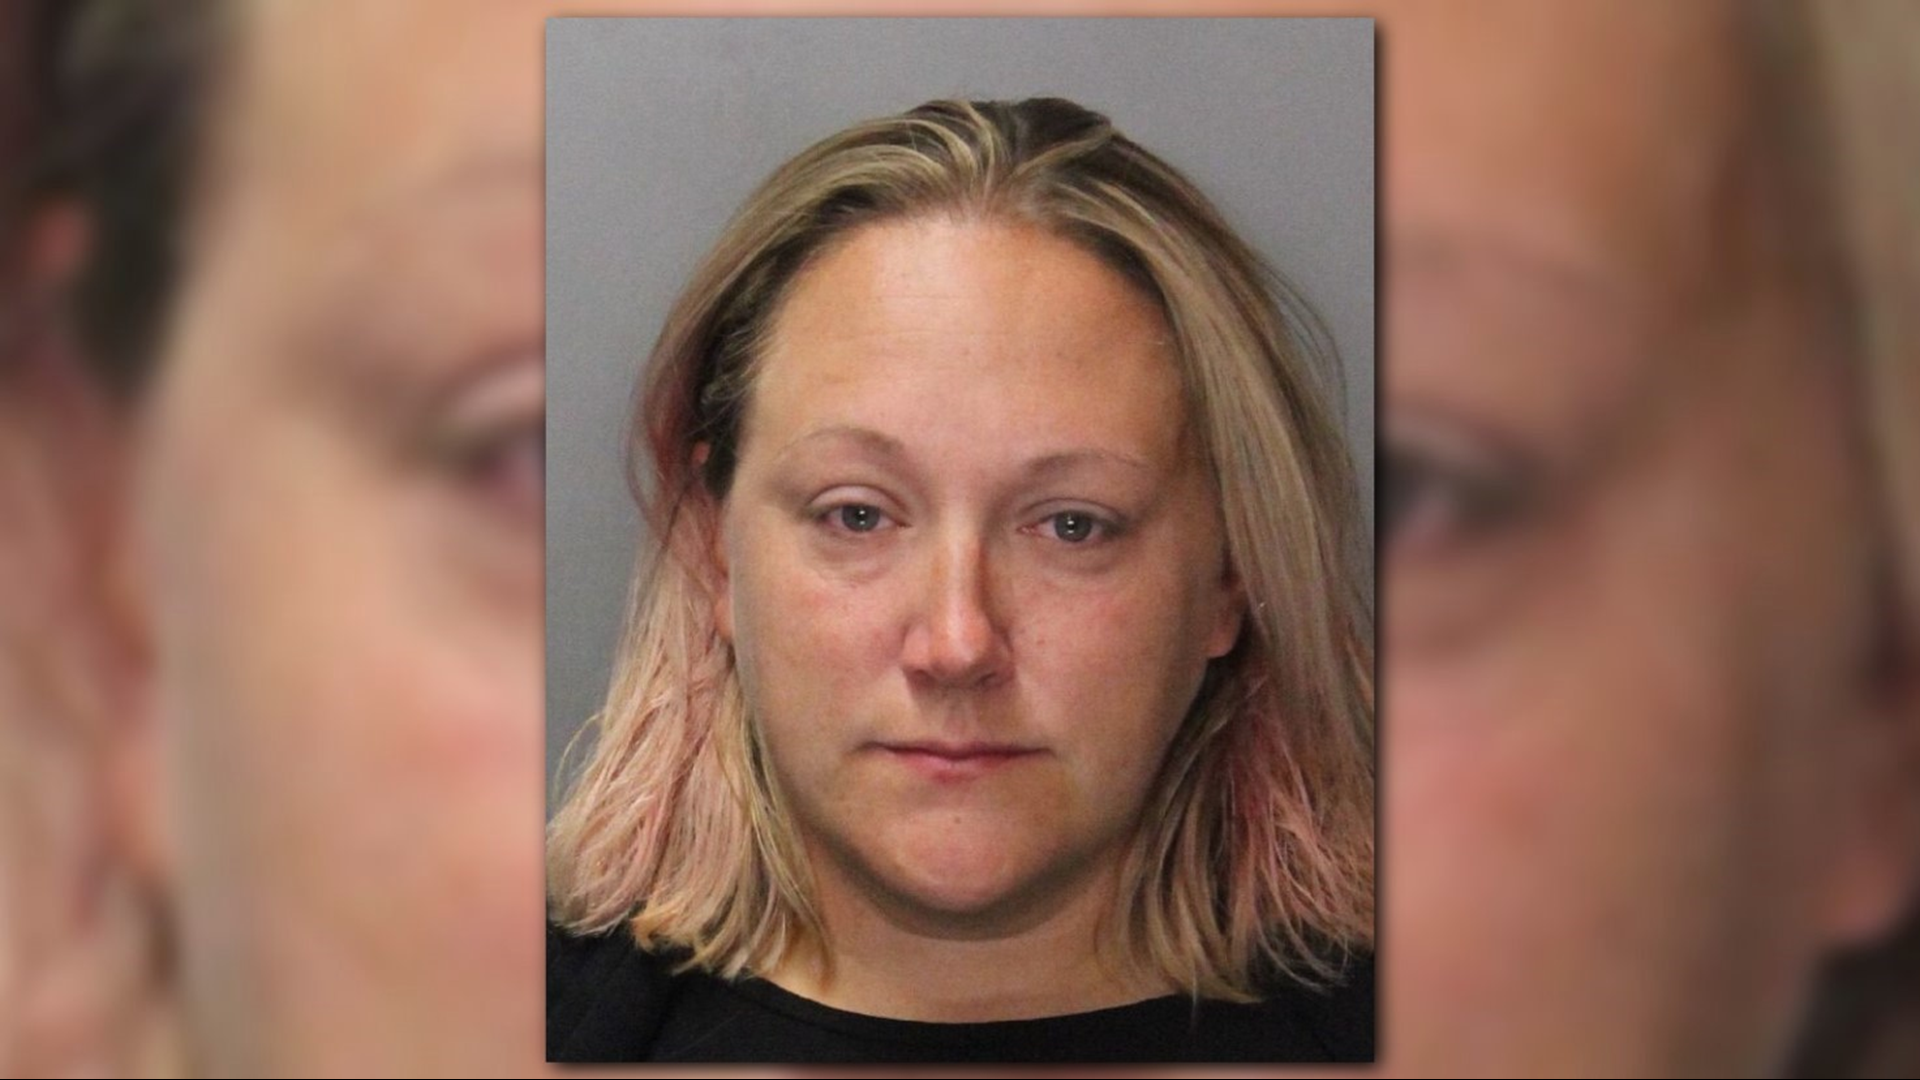 She's accused of stealing more than $138,000 from Deterding Elementary School's Parent-Teacher organization and the Carmichael Little League's bank account.